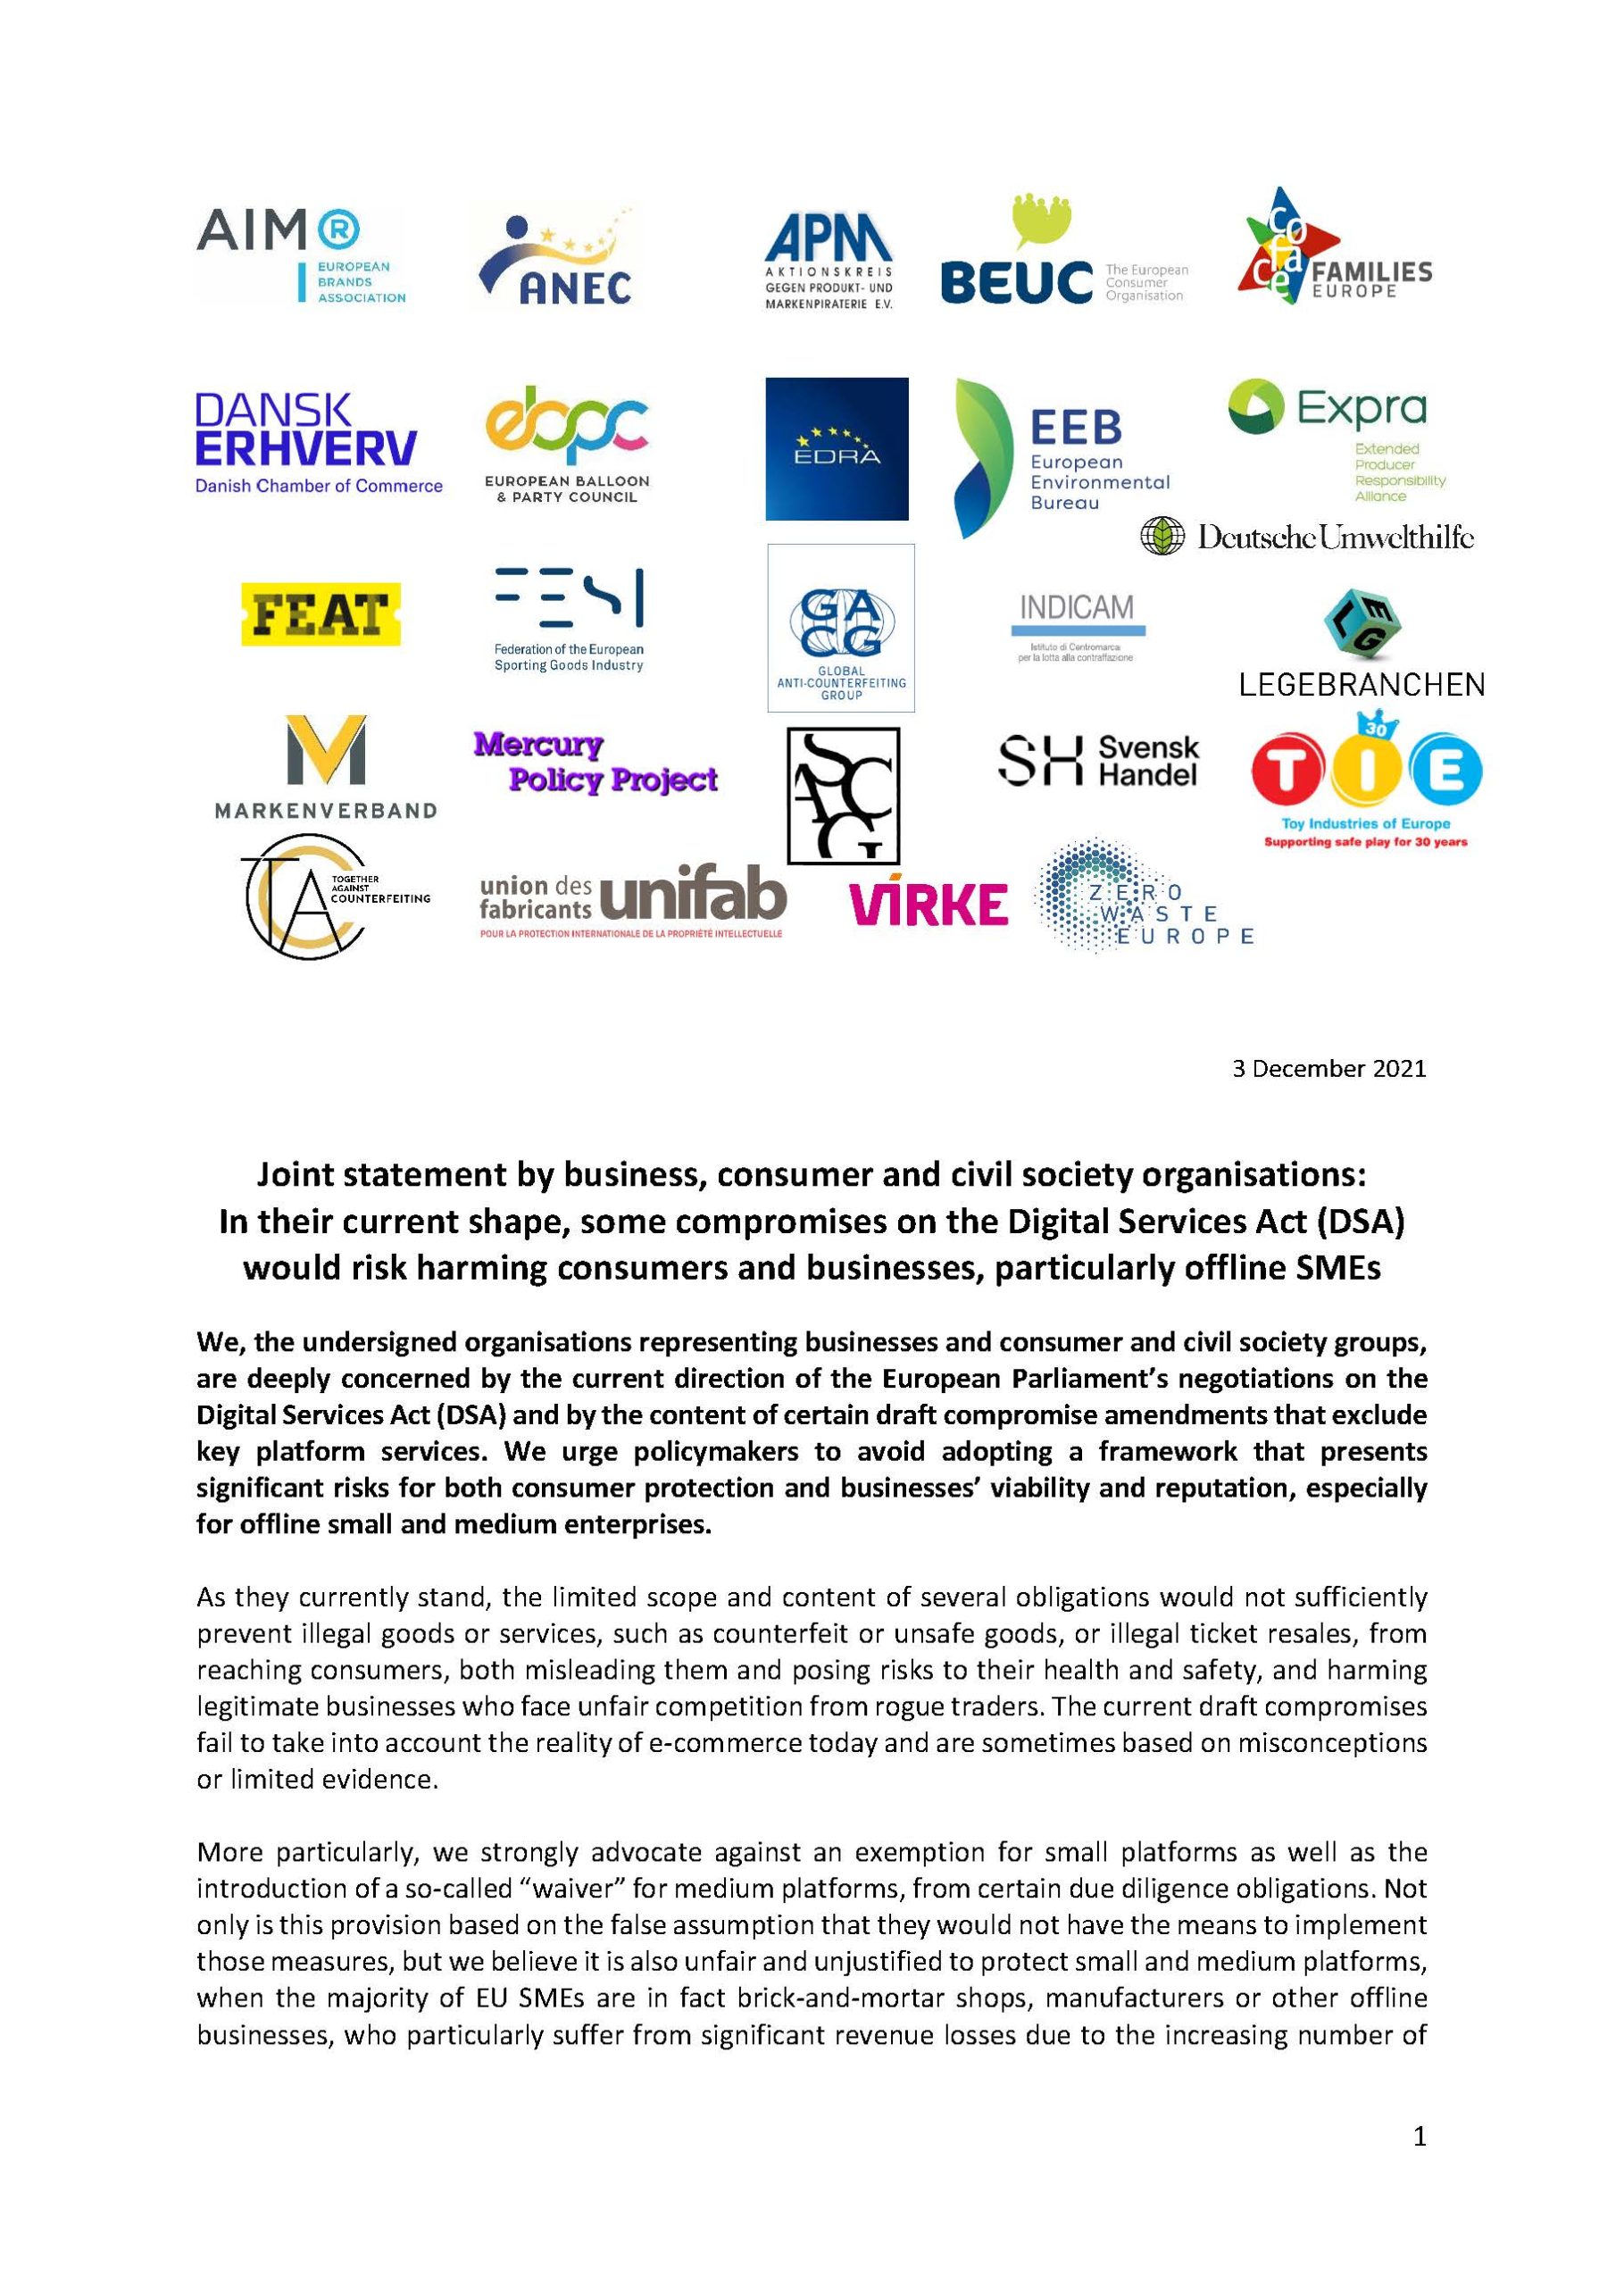 Joint statement by business, consumer and civil society organisations: In their current shape, some compromises on the Digital Services Act (DSA)  would risk harming consumers and businesses, particularly offline SMEs